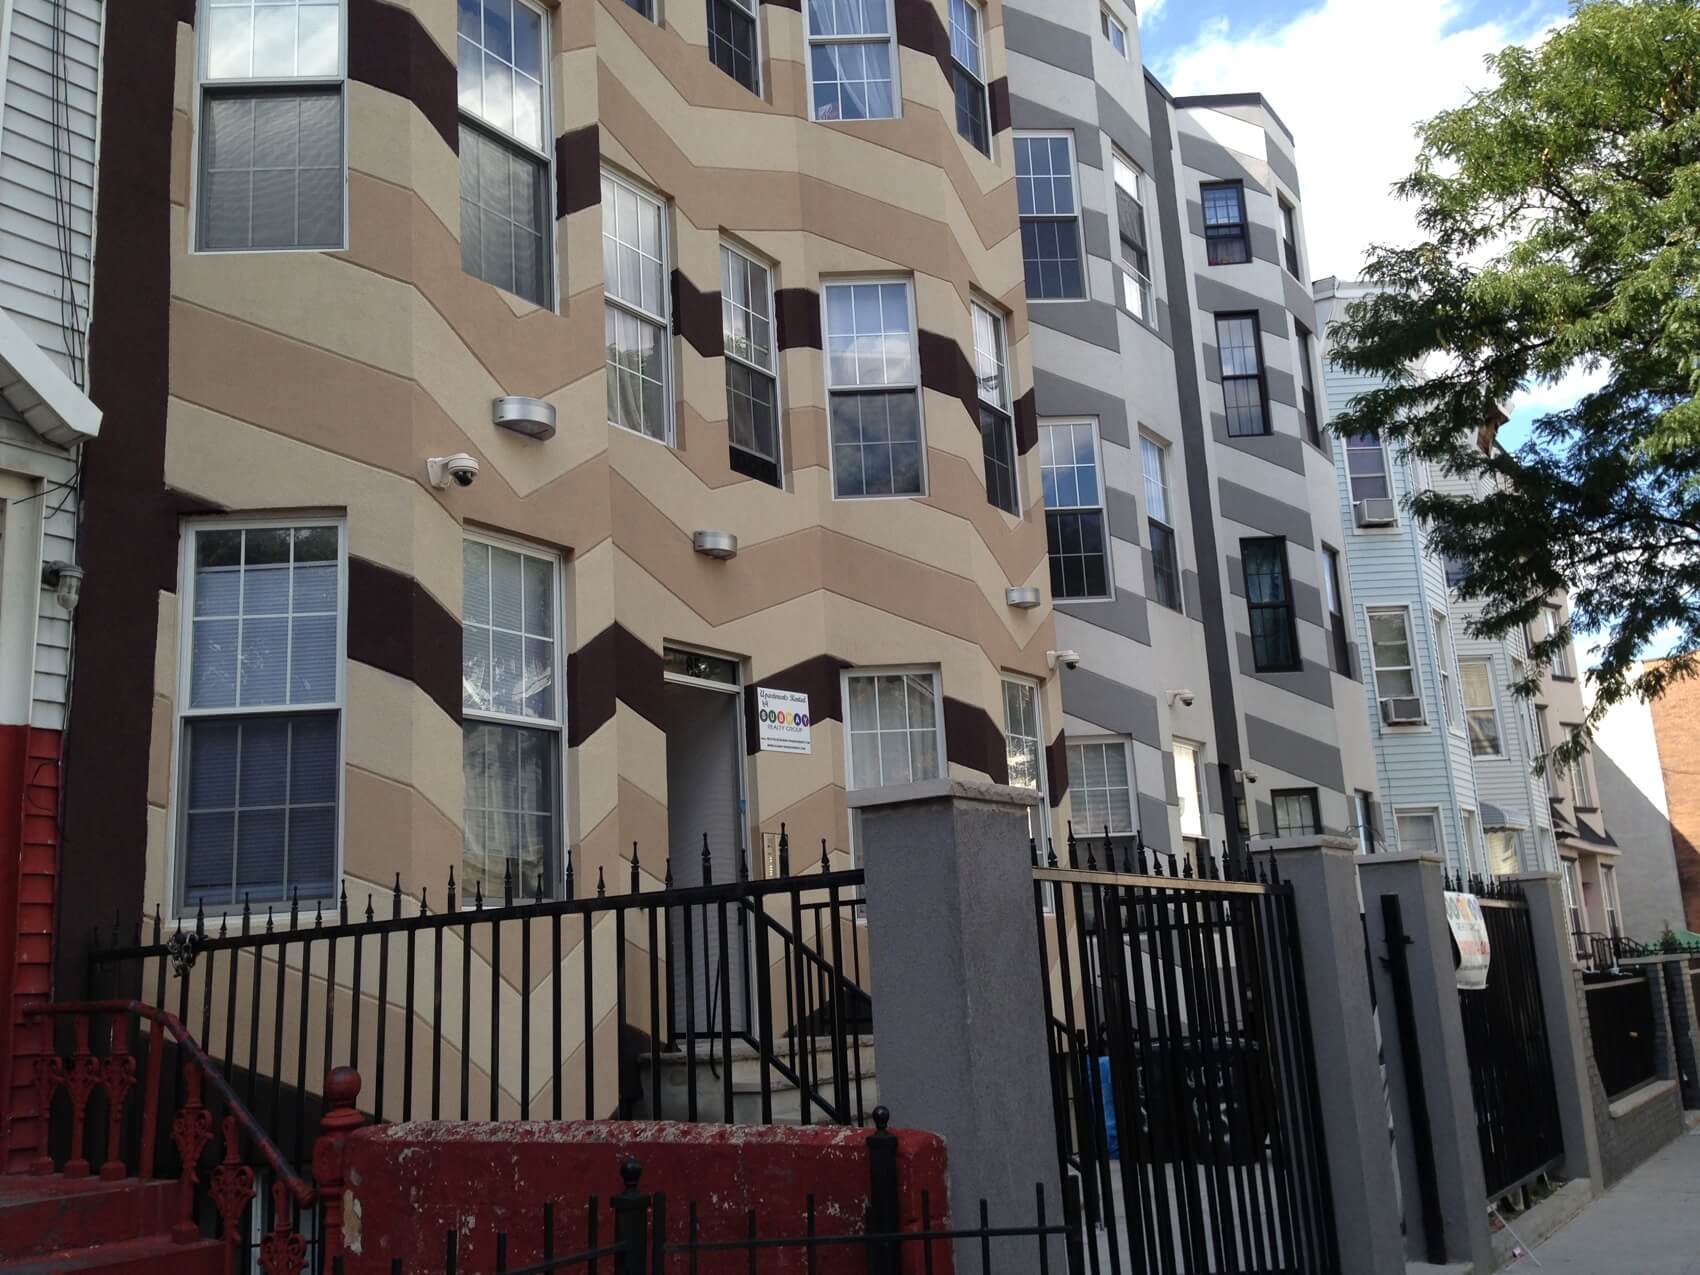 A group of wood frame houses on Cornelia Street in Bushwick with new stucco facades. Photo by Cate Corcoran